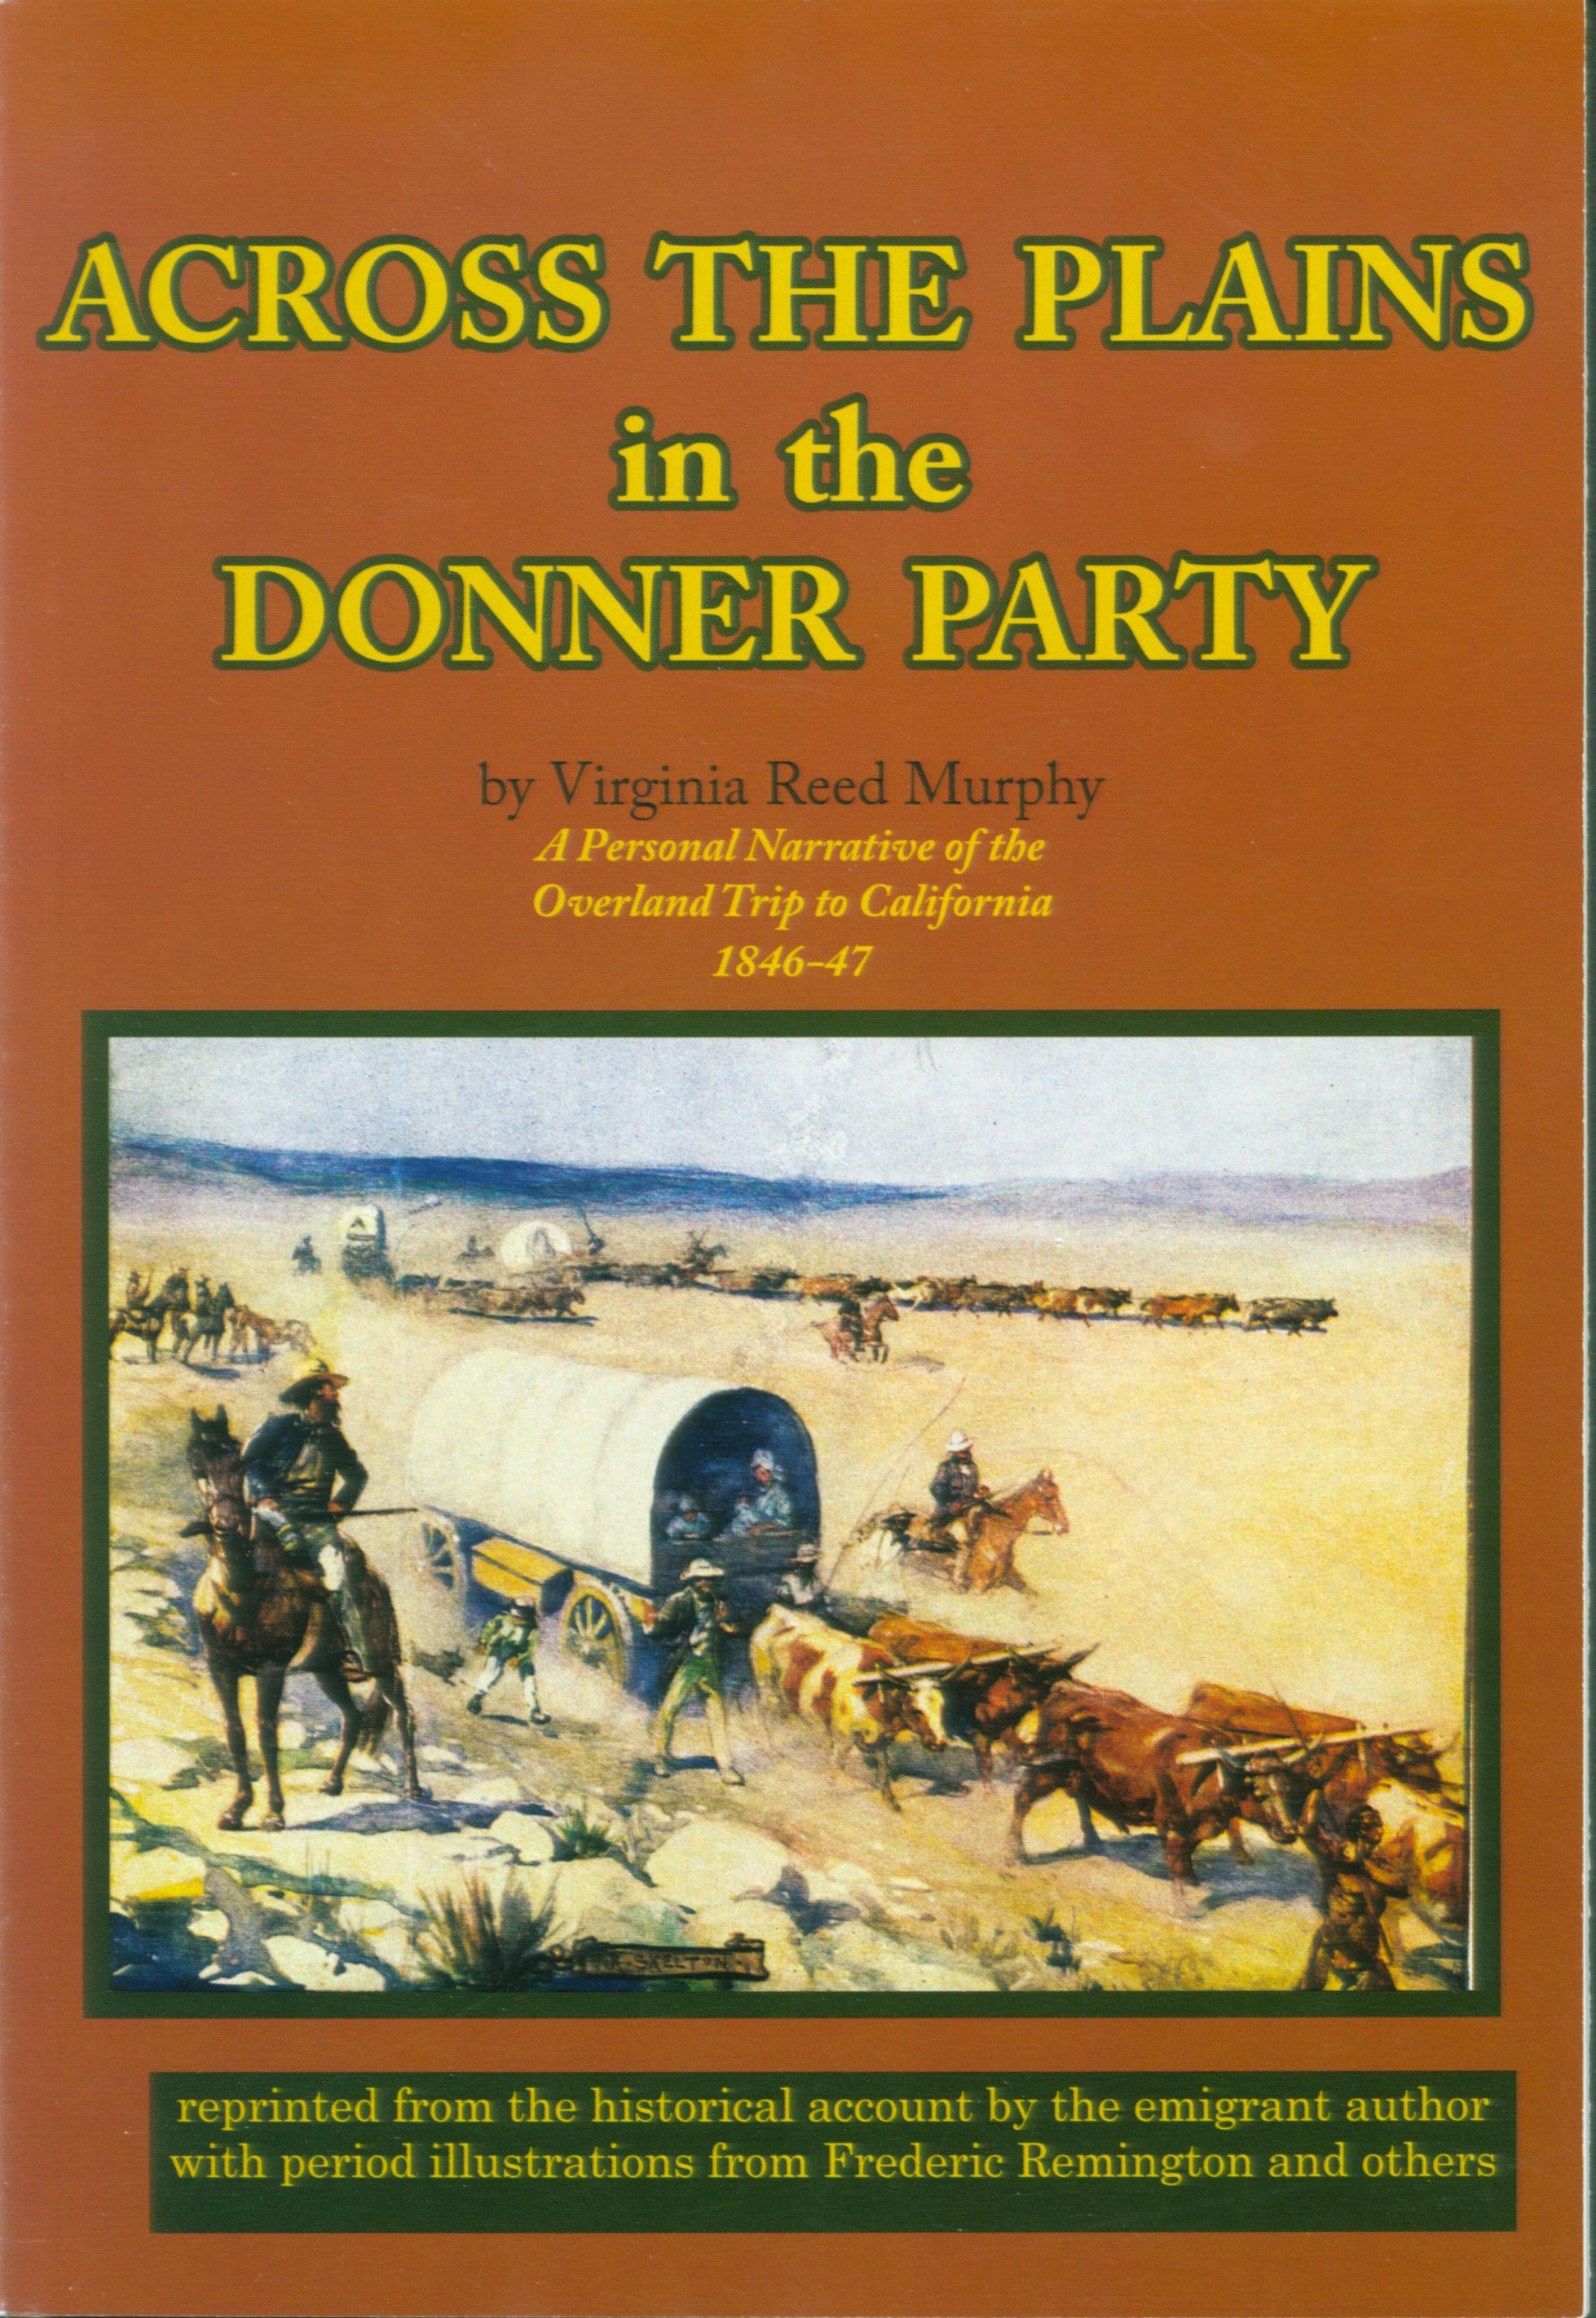 ACROSS THE PLAINS IN THE DONNER PARTY: a personal narrative of the overland trip to California, 1846-47.